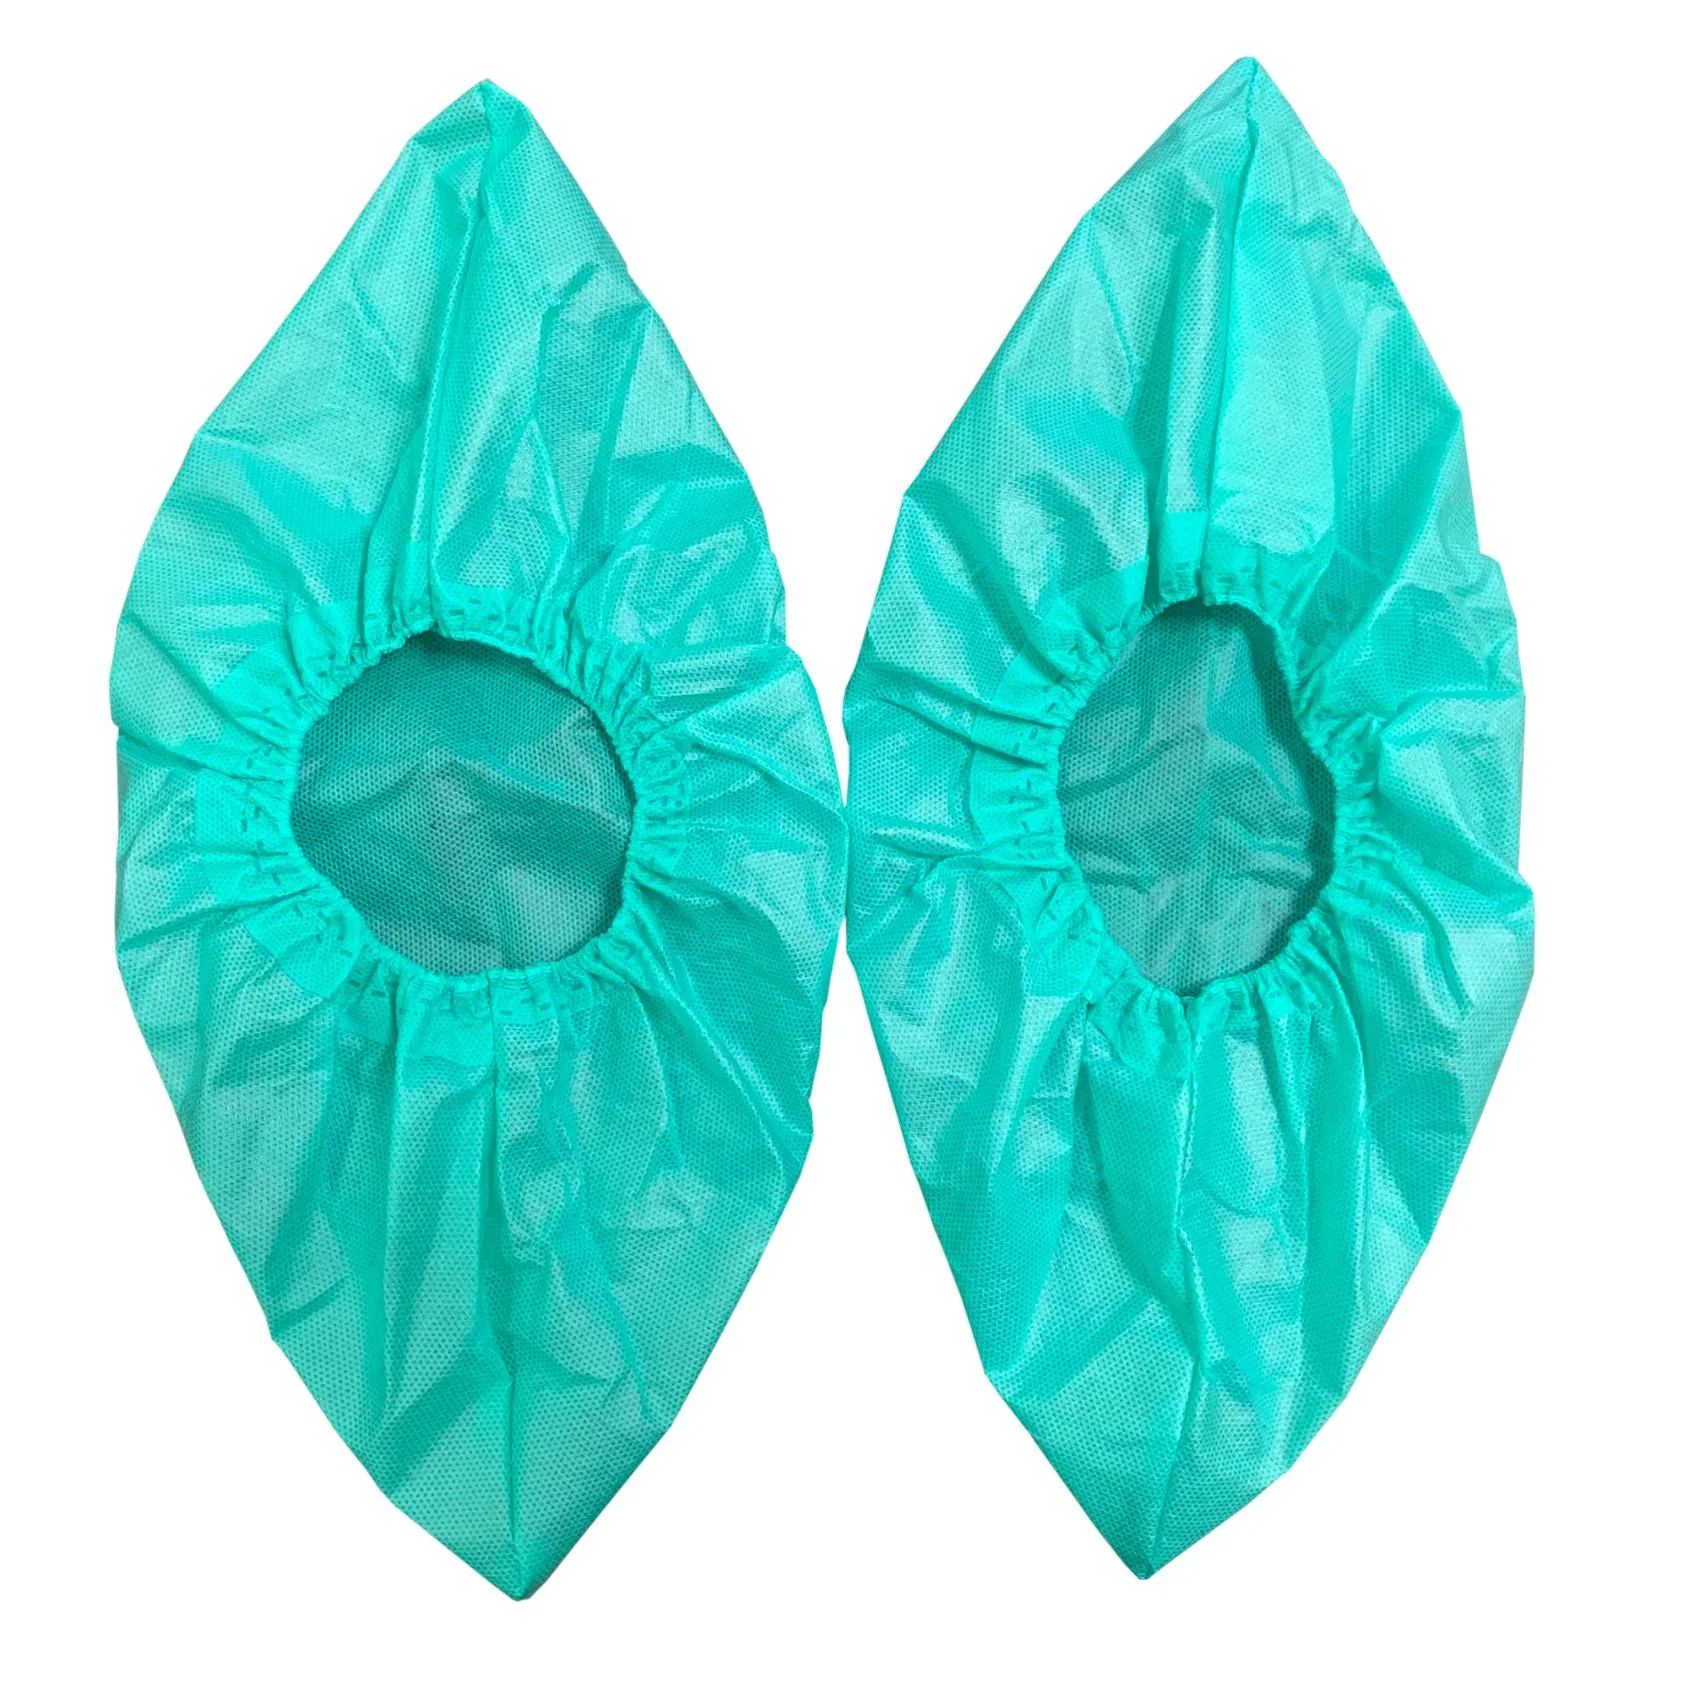 Disposable Nonwoven Shoe Cover for Medical, Daily and Surgical Use